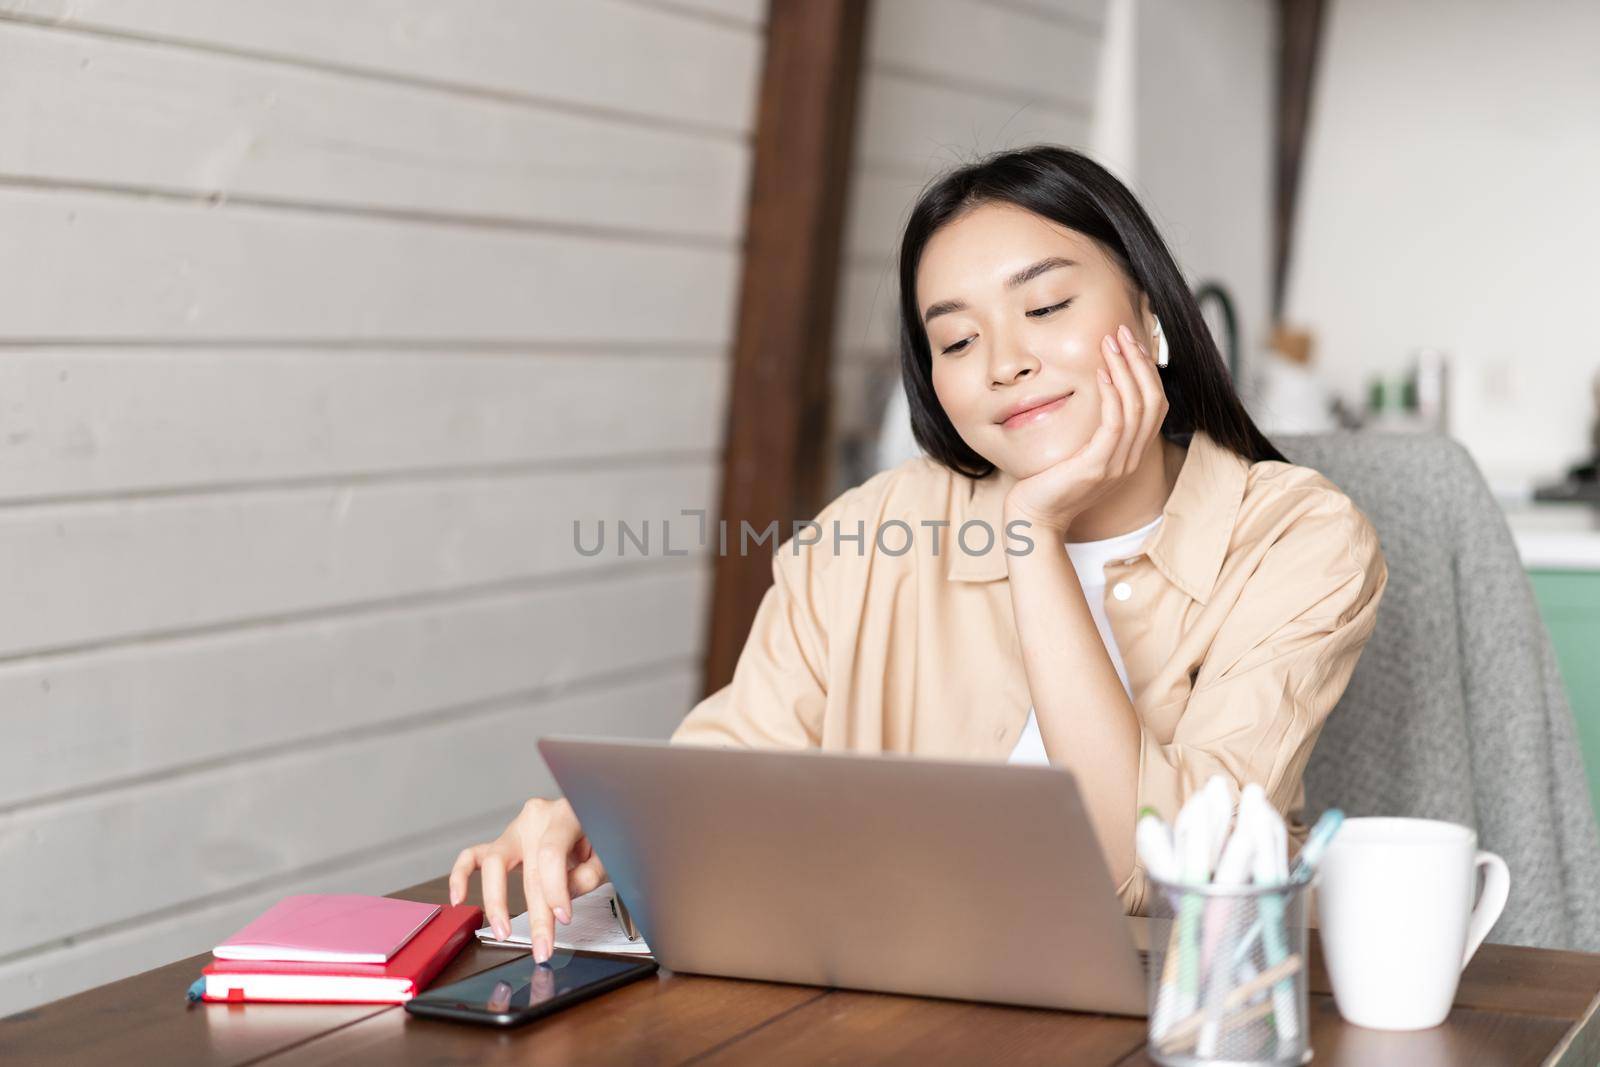 Smiling asian girl student, woman sitting with laptop at home kitchen, browing smartphone social media and resting during online classes break, waiting for webinar.